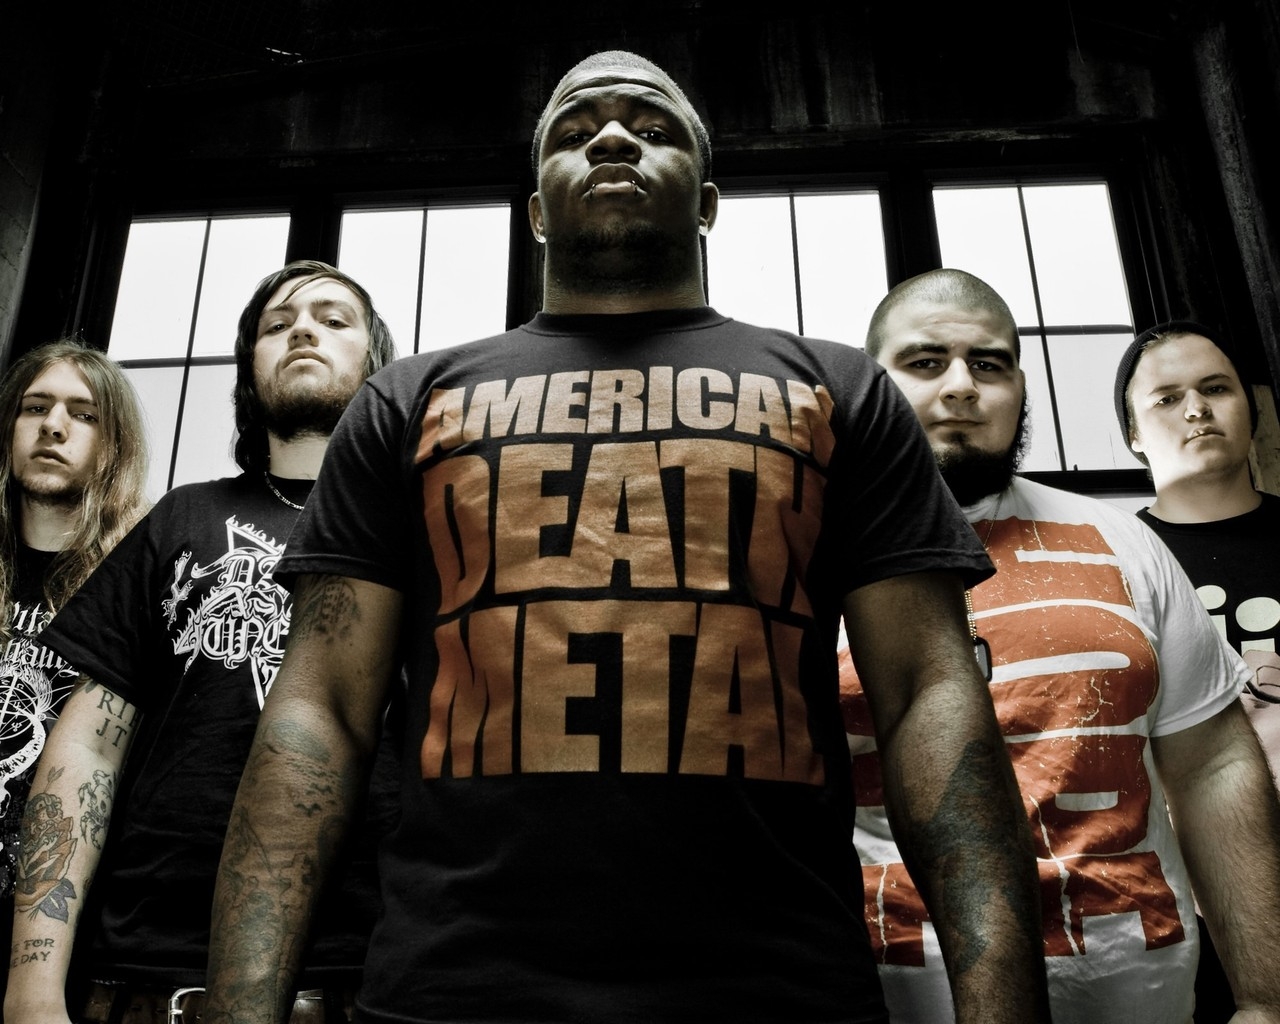 Oceano Metal Band for 1280 x 1024 resolution